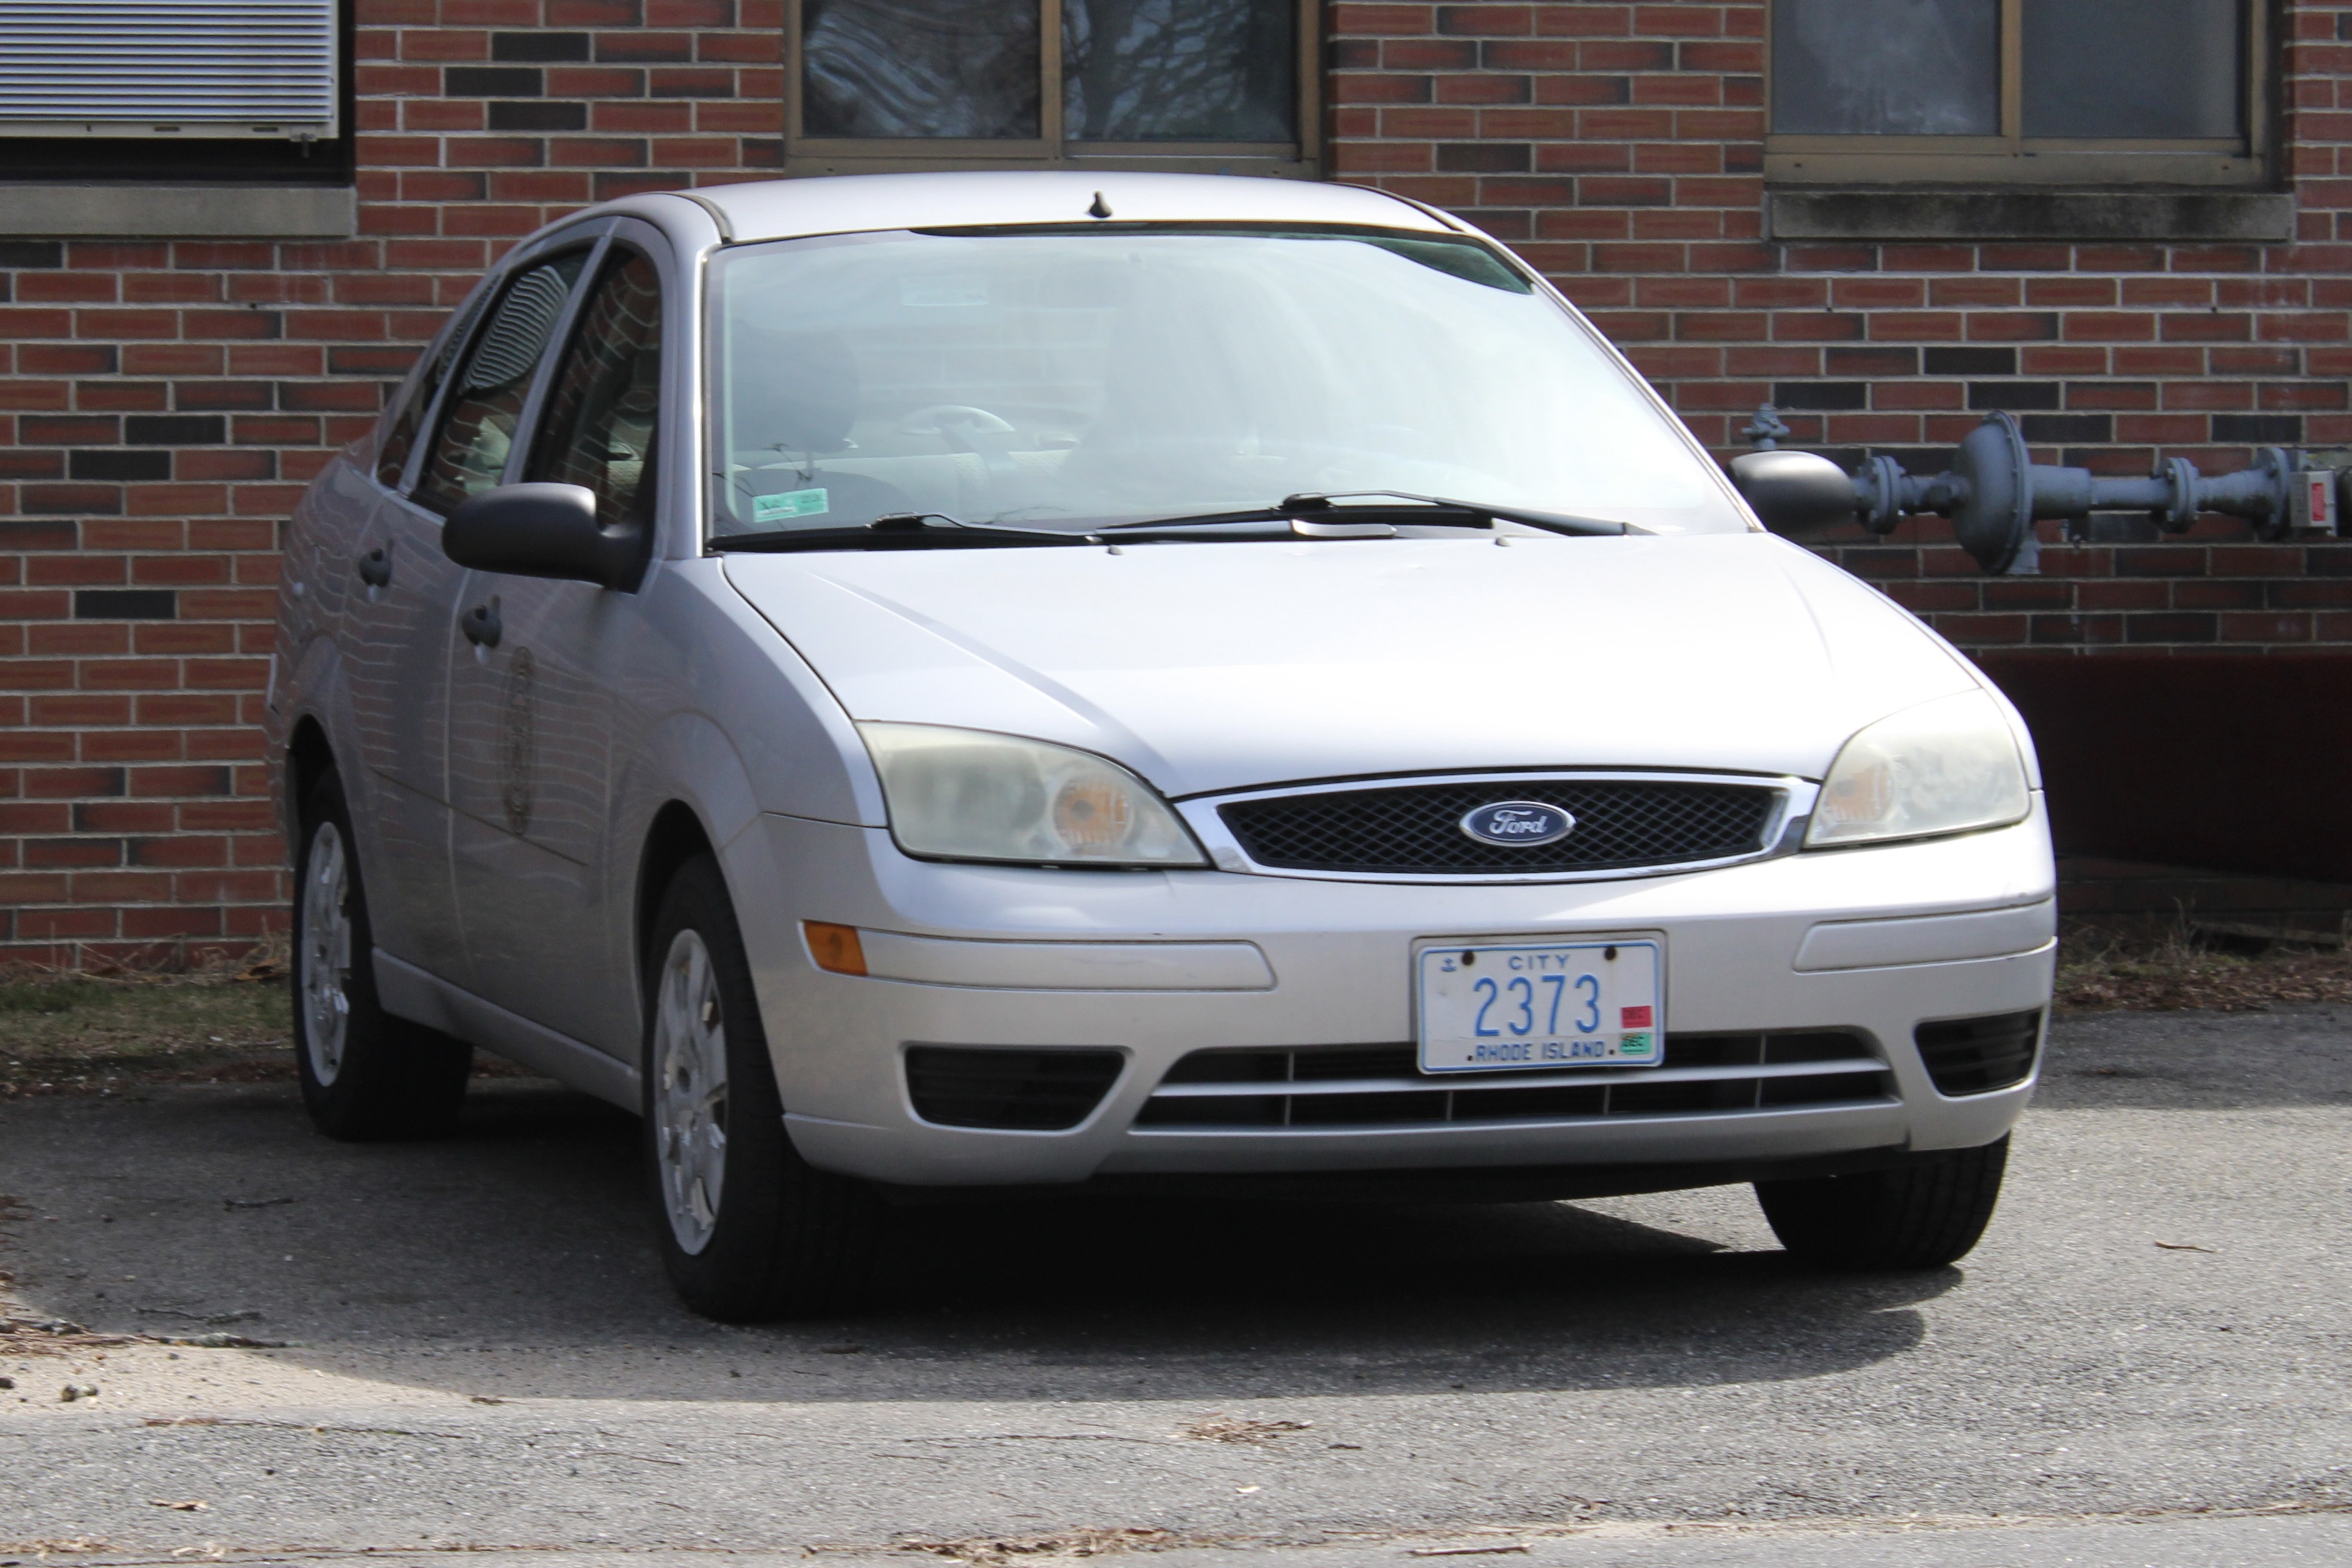 A photo  of Warwick Public Works
            Car 2373, a 1998-2005 Ford Focus             taken by @riemergencyvehicles